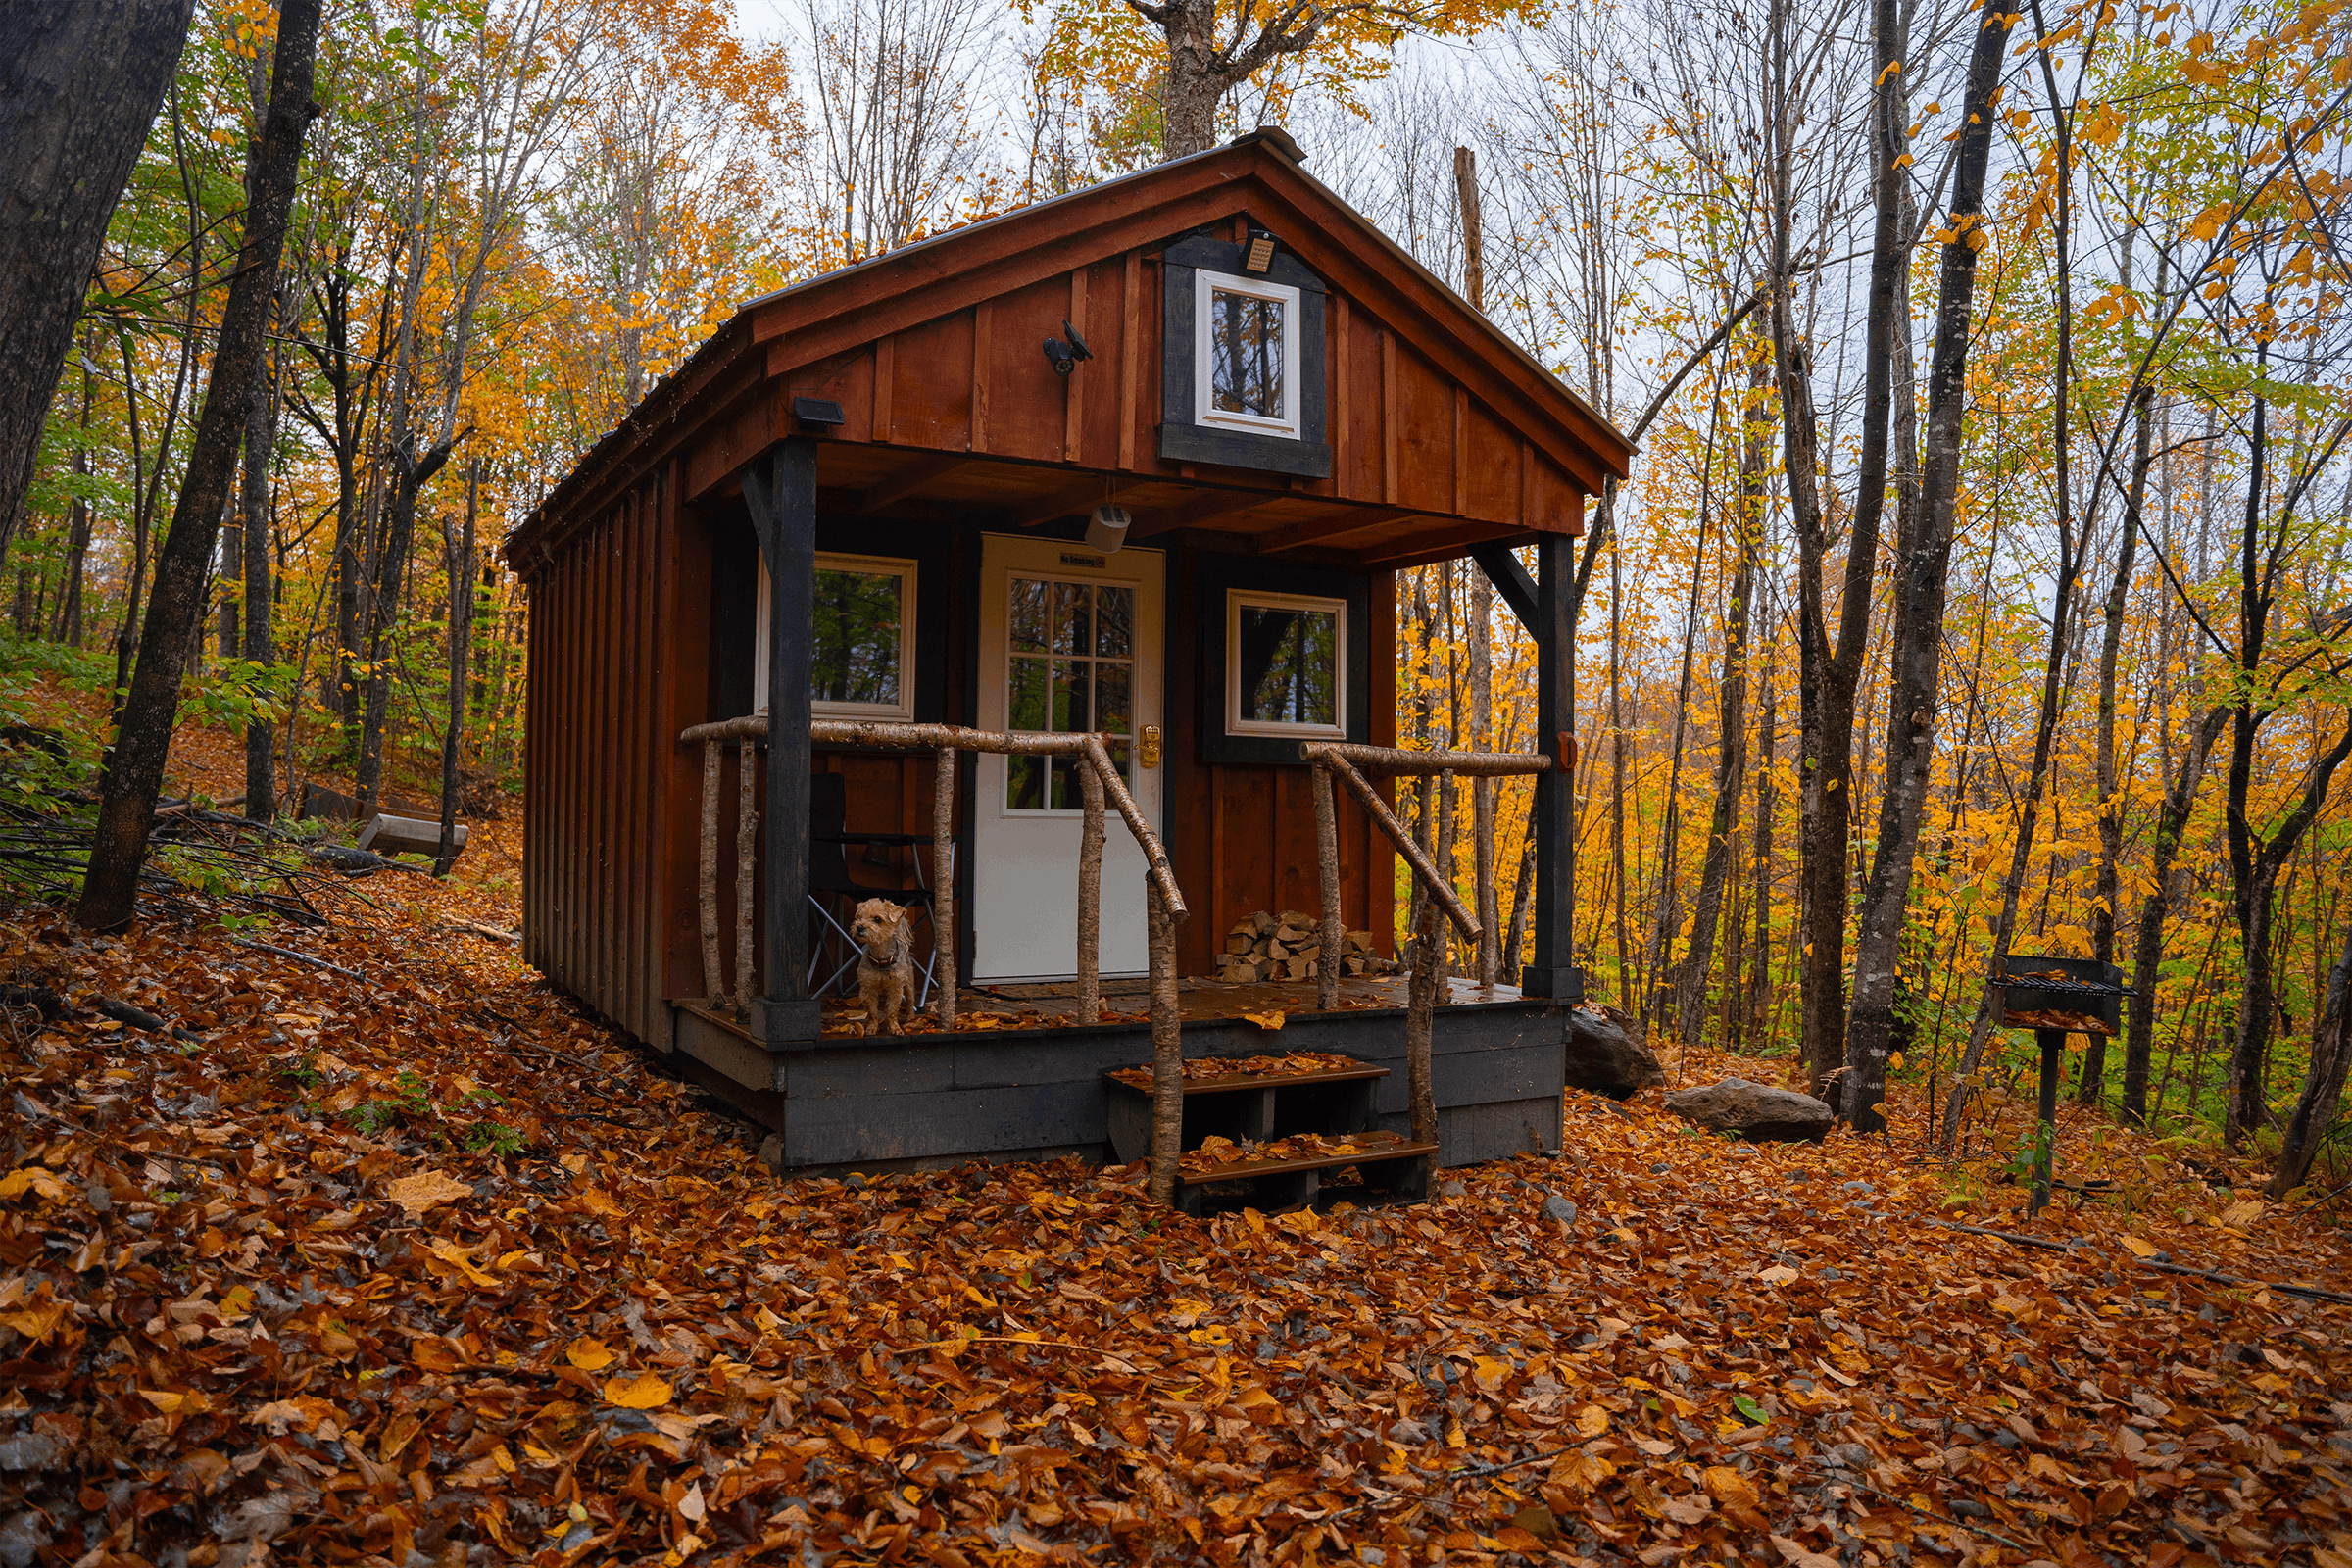 A red cabin in the woods with a small dog on the porch.